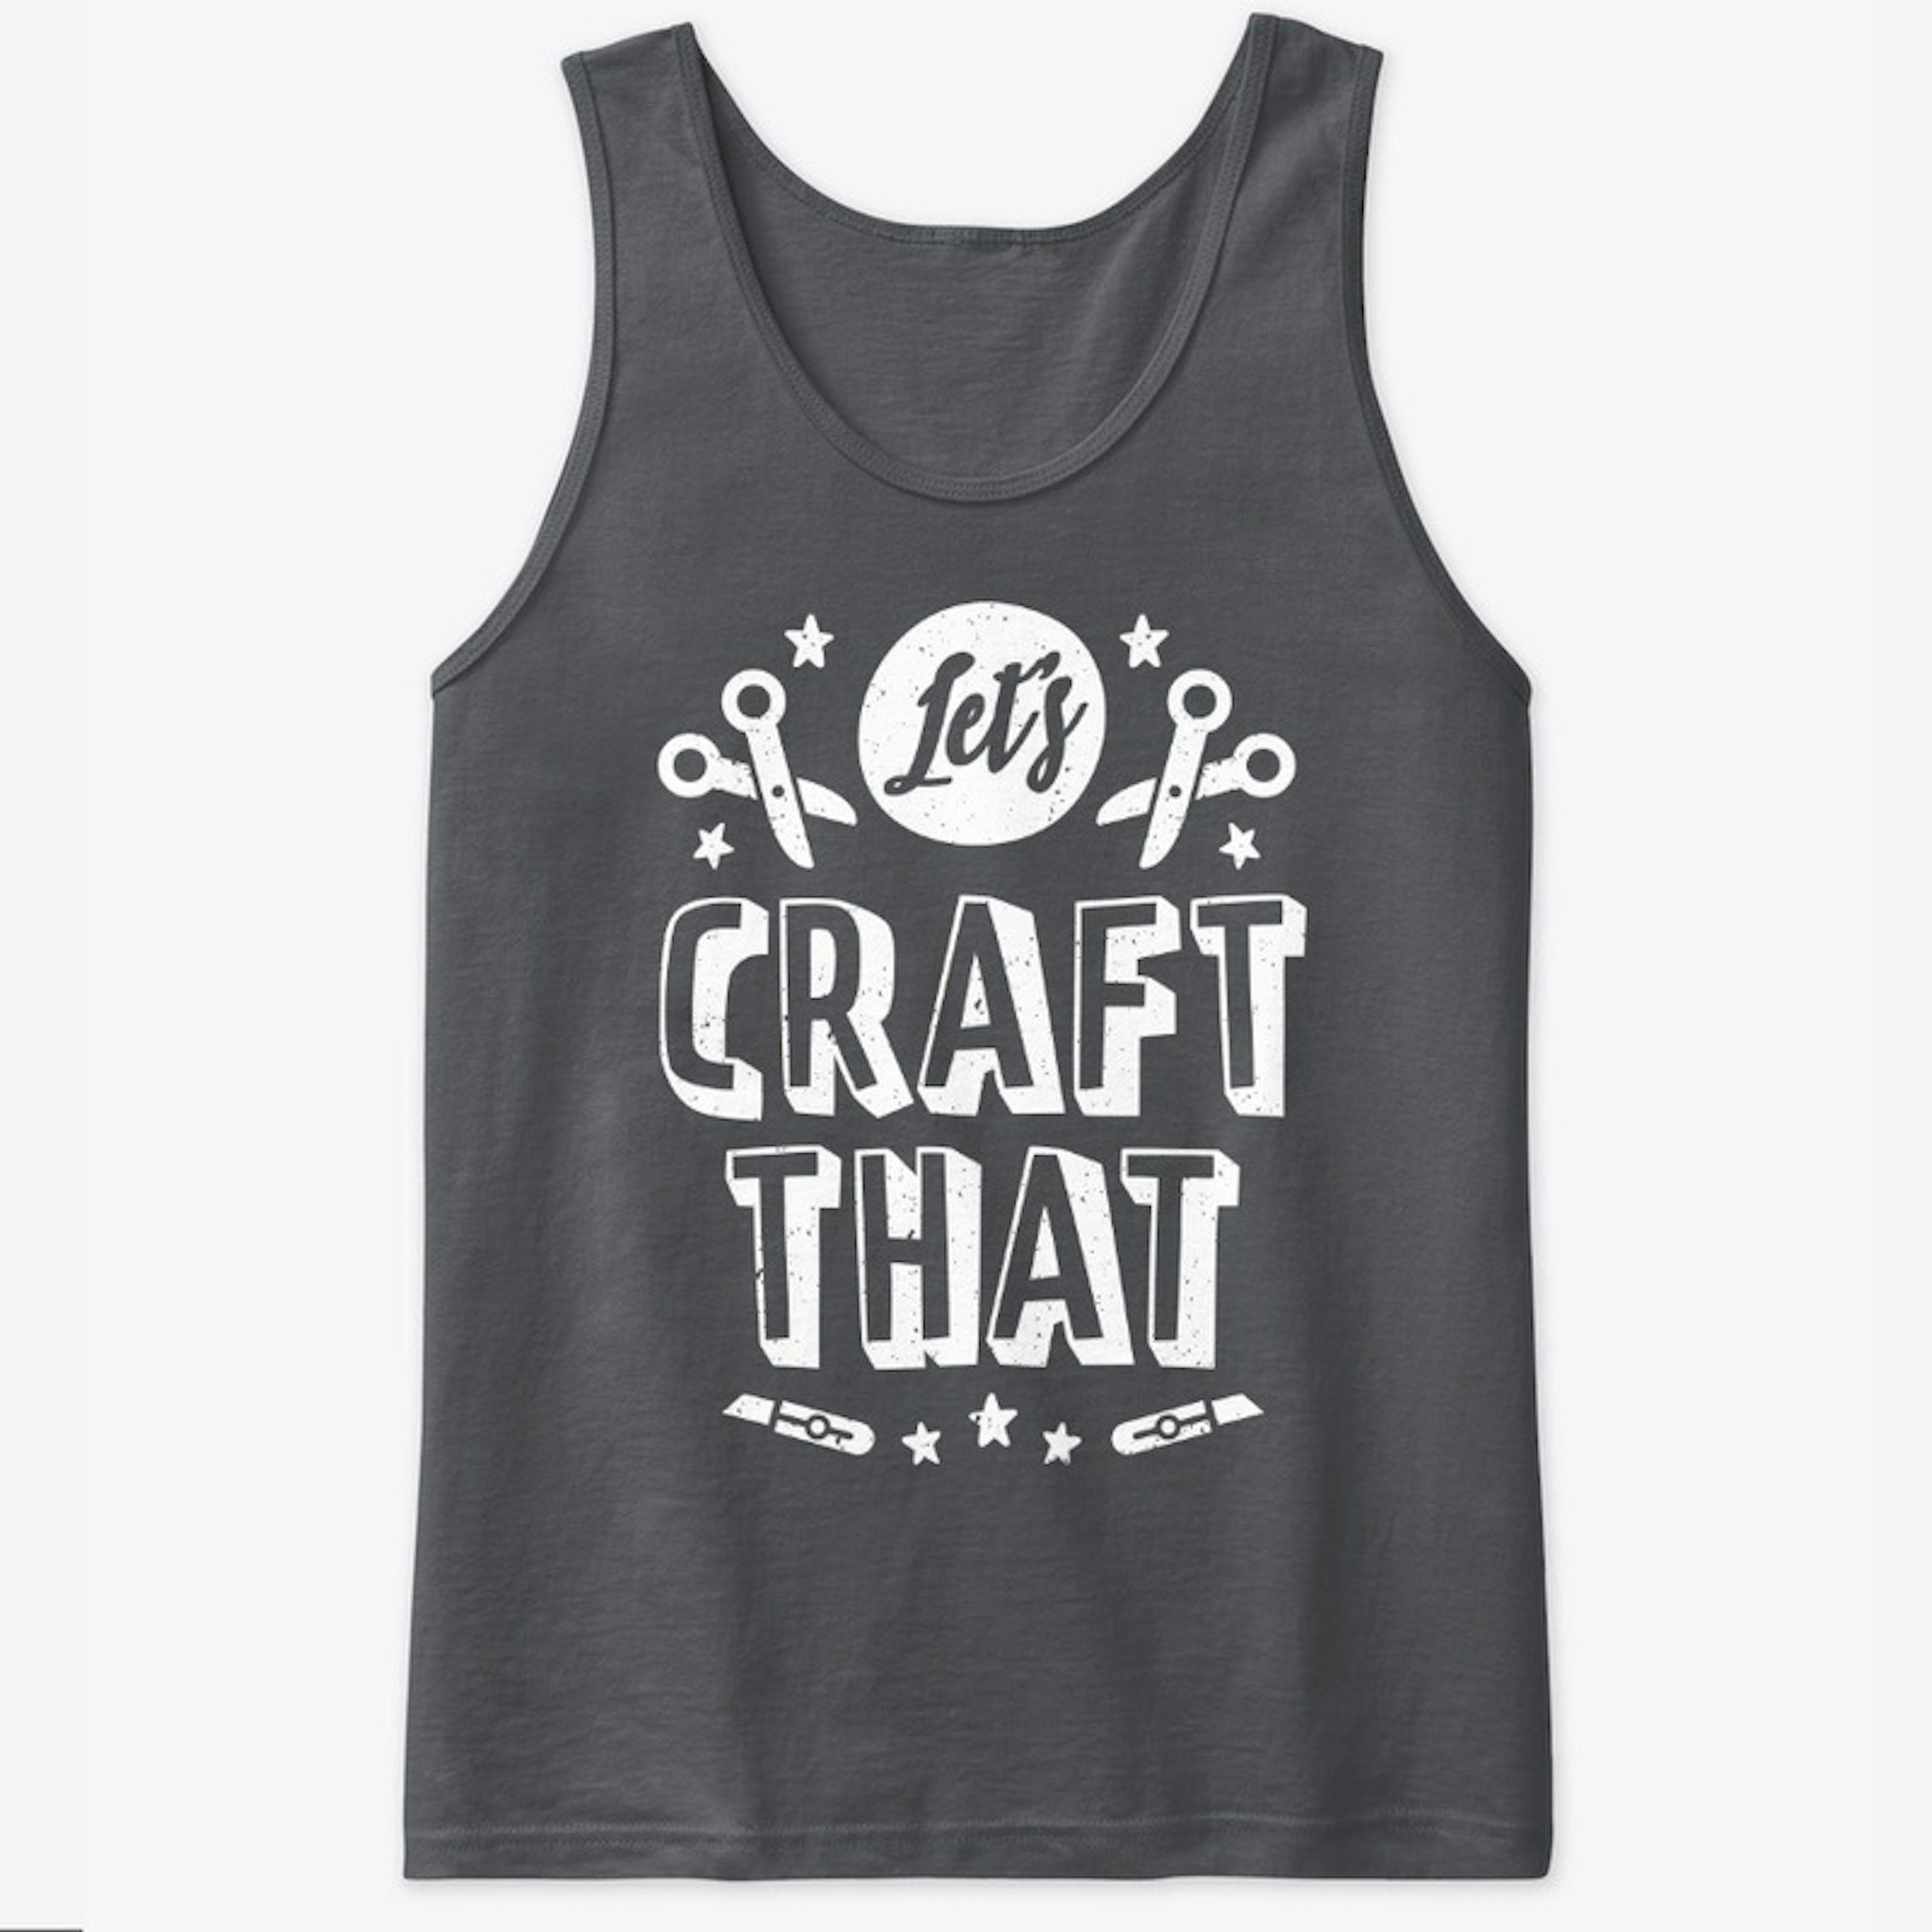 Let's craft that!